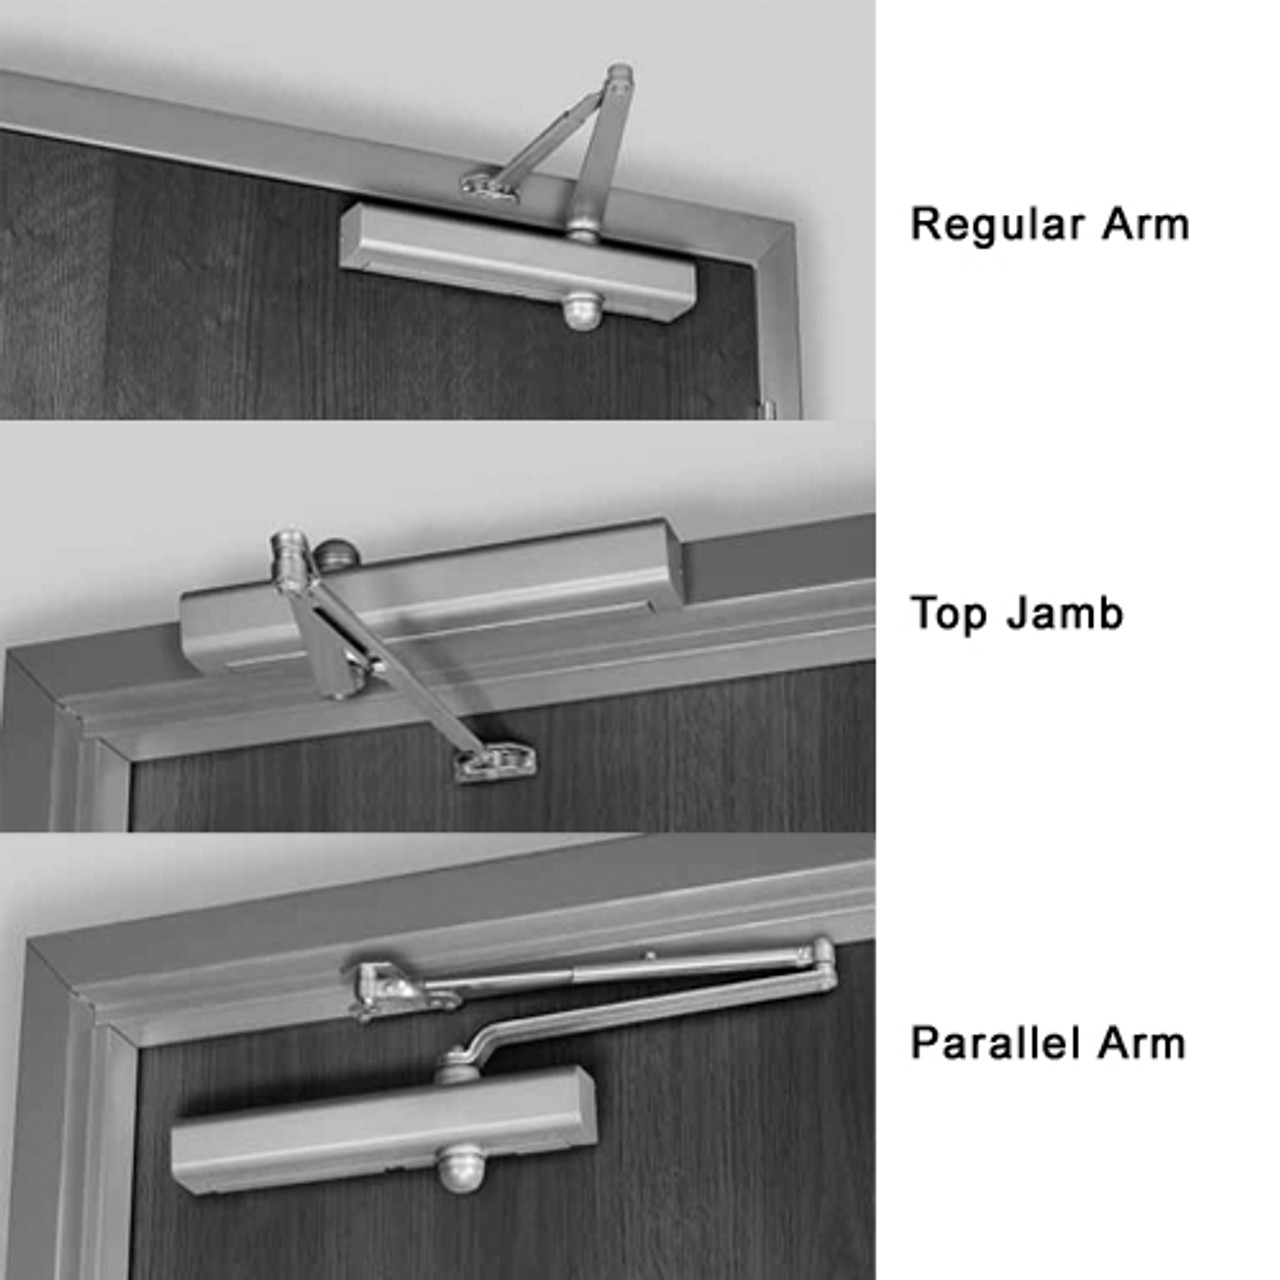 8301HDA-691 Norton 8000 Series Hold Open Door Closers with Regular Parallel and Top Jamb to 2-3/4 inch Reveal in Dull Bronze Finish